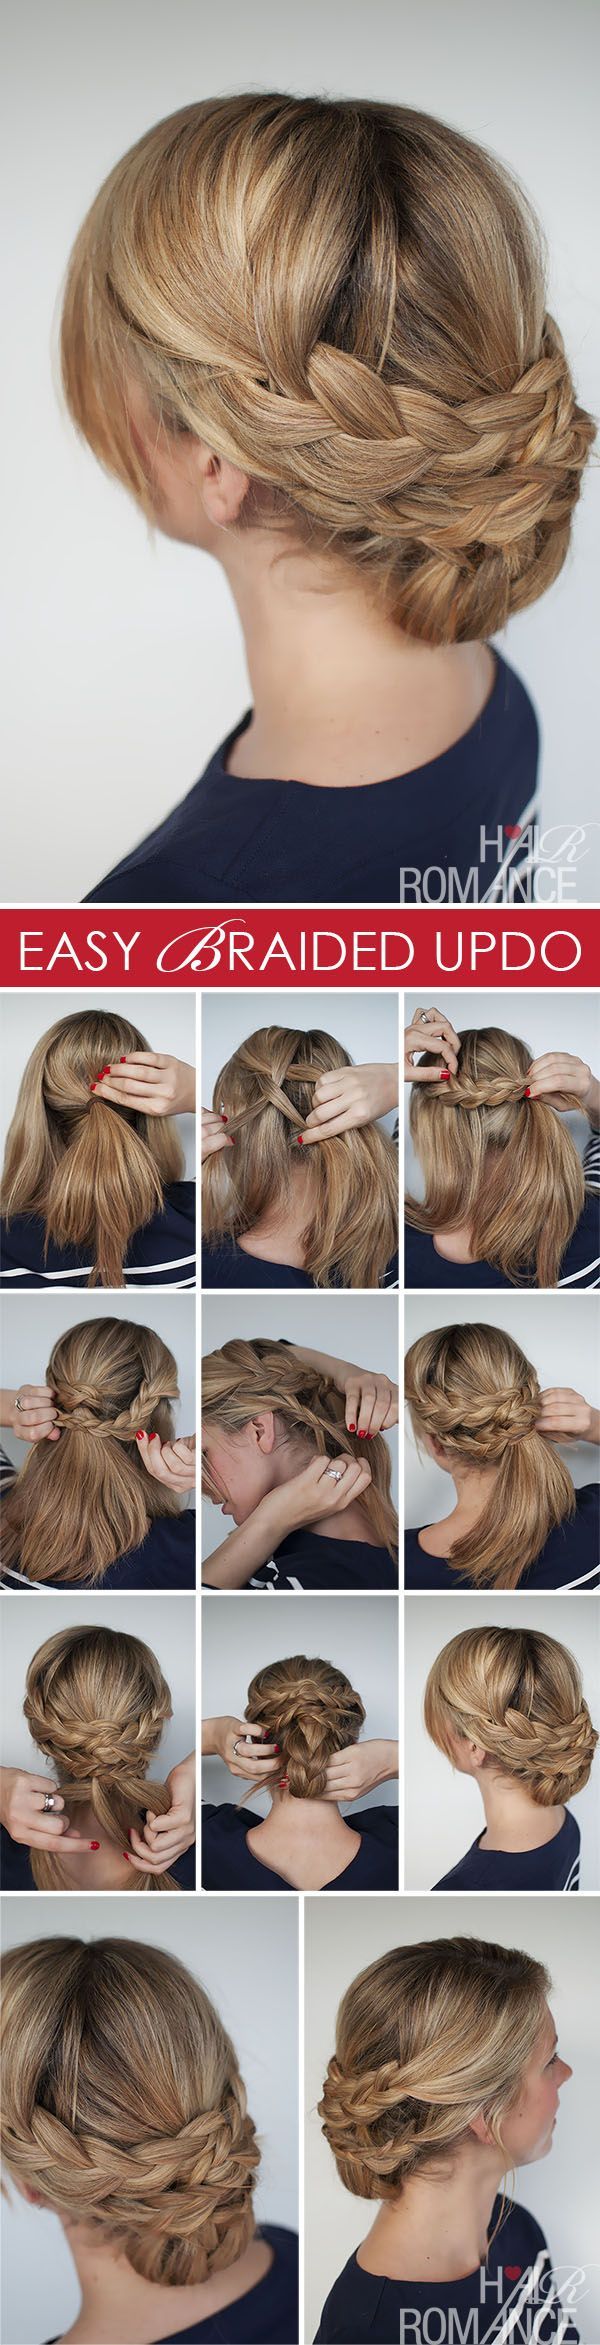 Hairstyle how to – Hair Romance easy braided upstyle tutorial